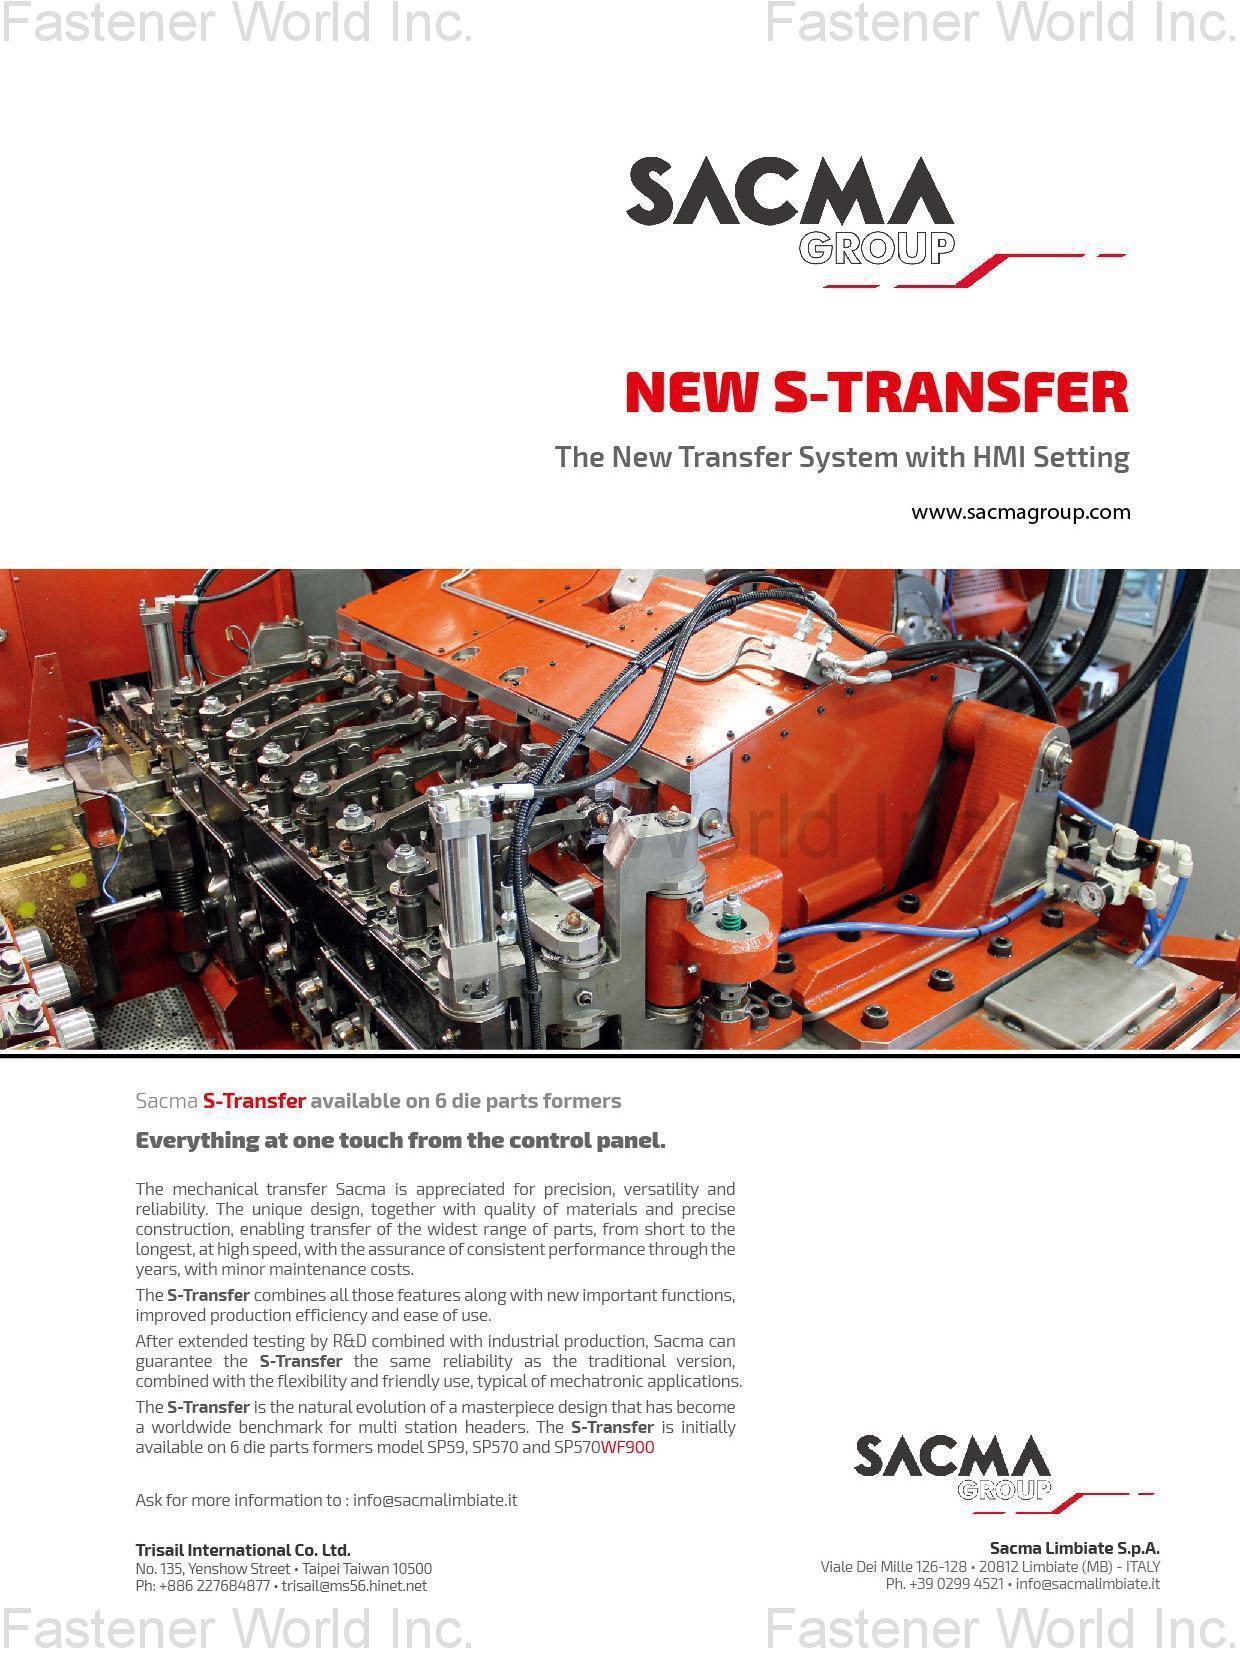 SACMA GROUP , New S-Transfer (The New Transfer System with HMI Setting)